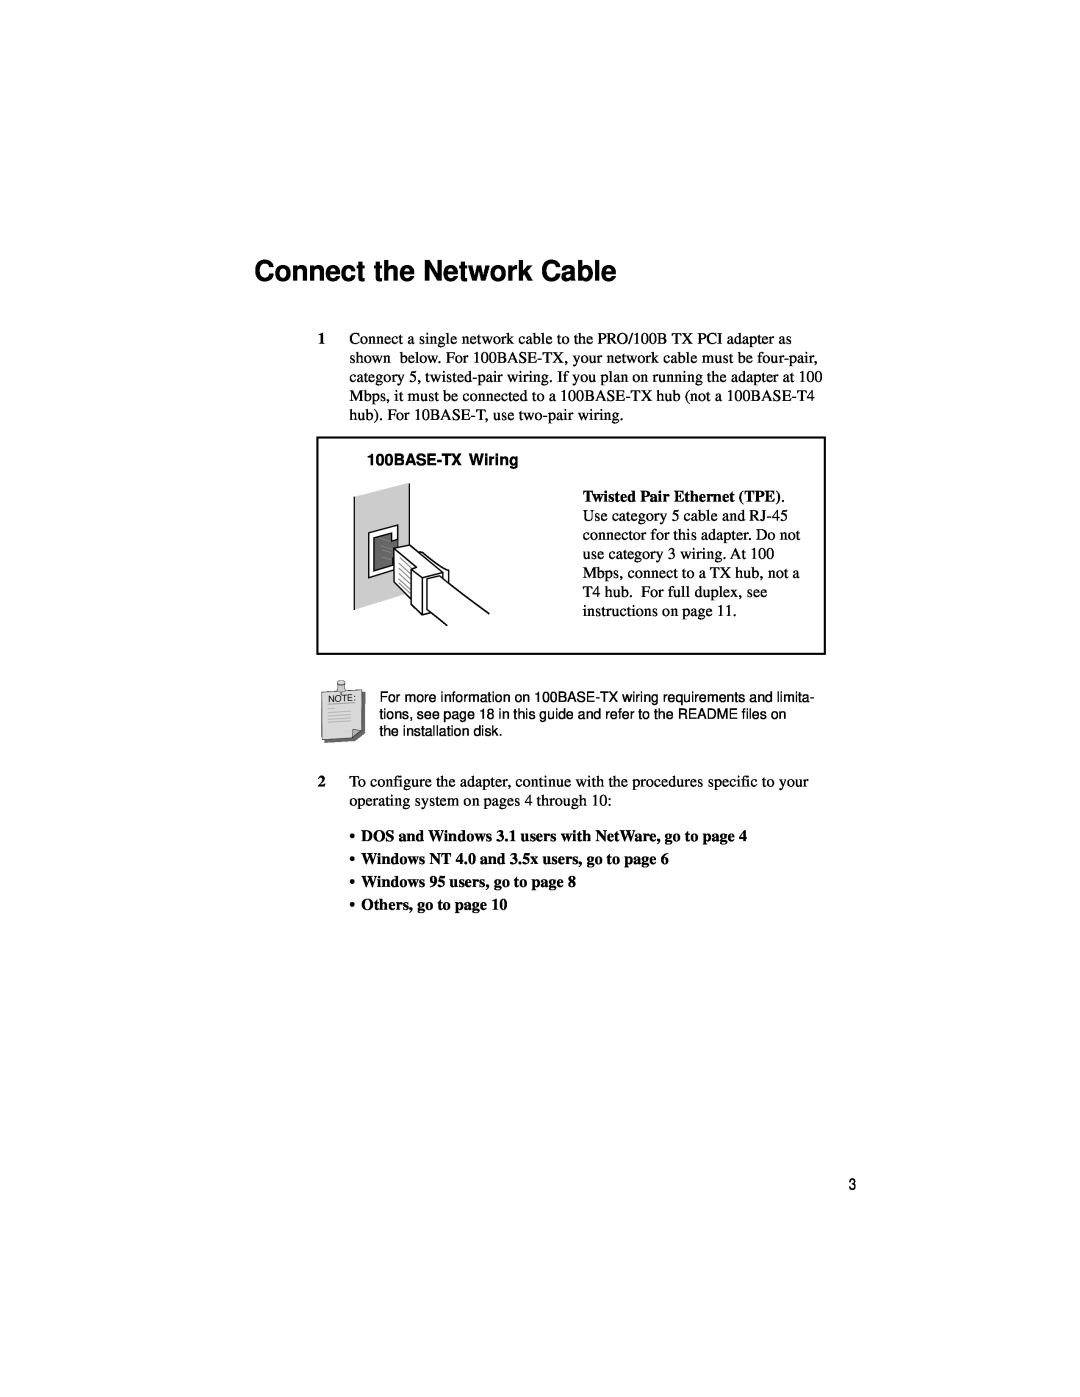 Intel PRO/100 TX PCI manual Connect the Network Cable, 100BASE-TX Wiring 